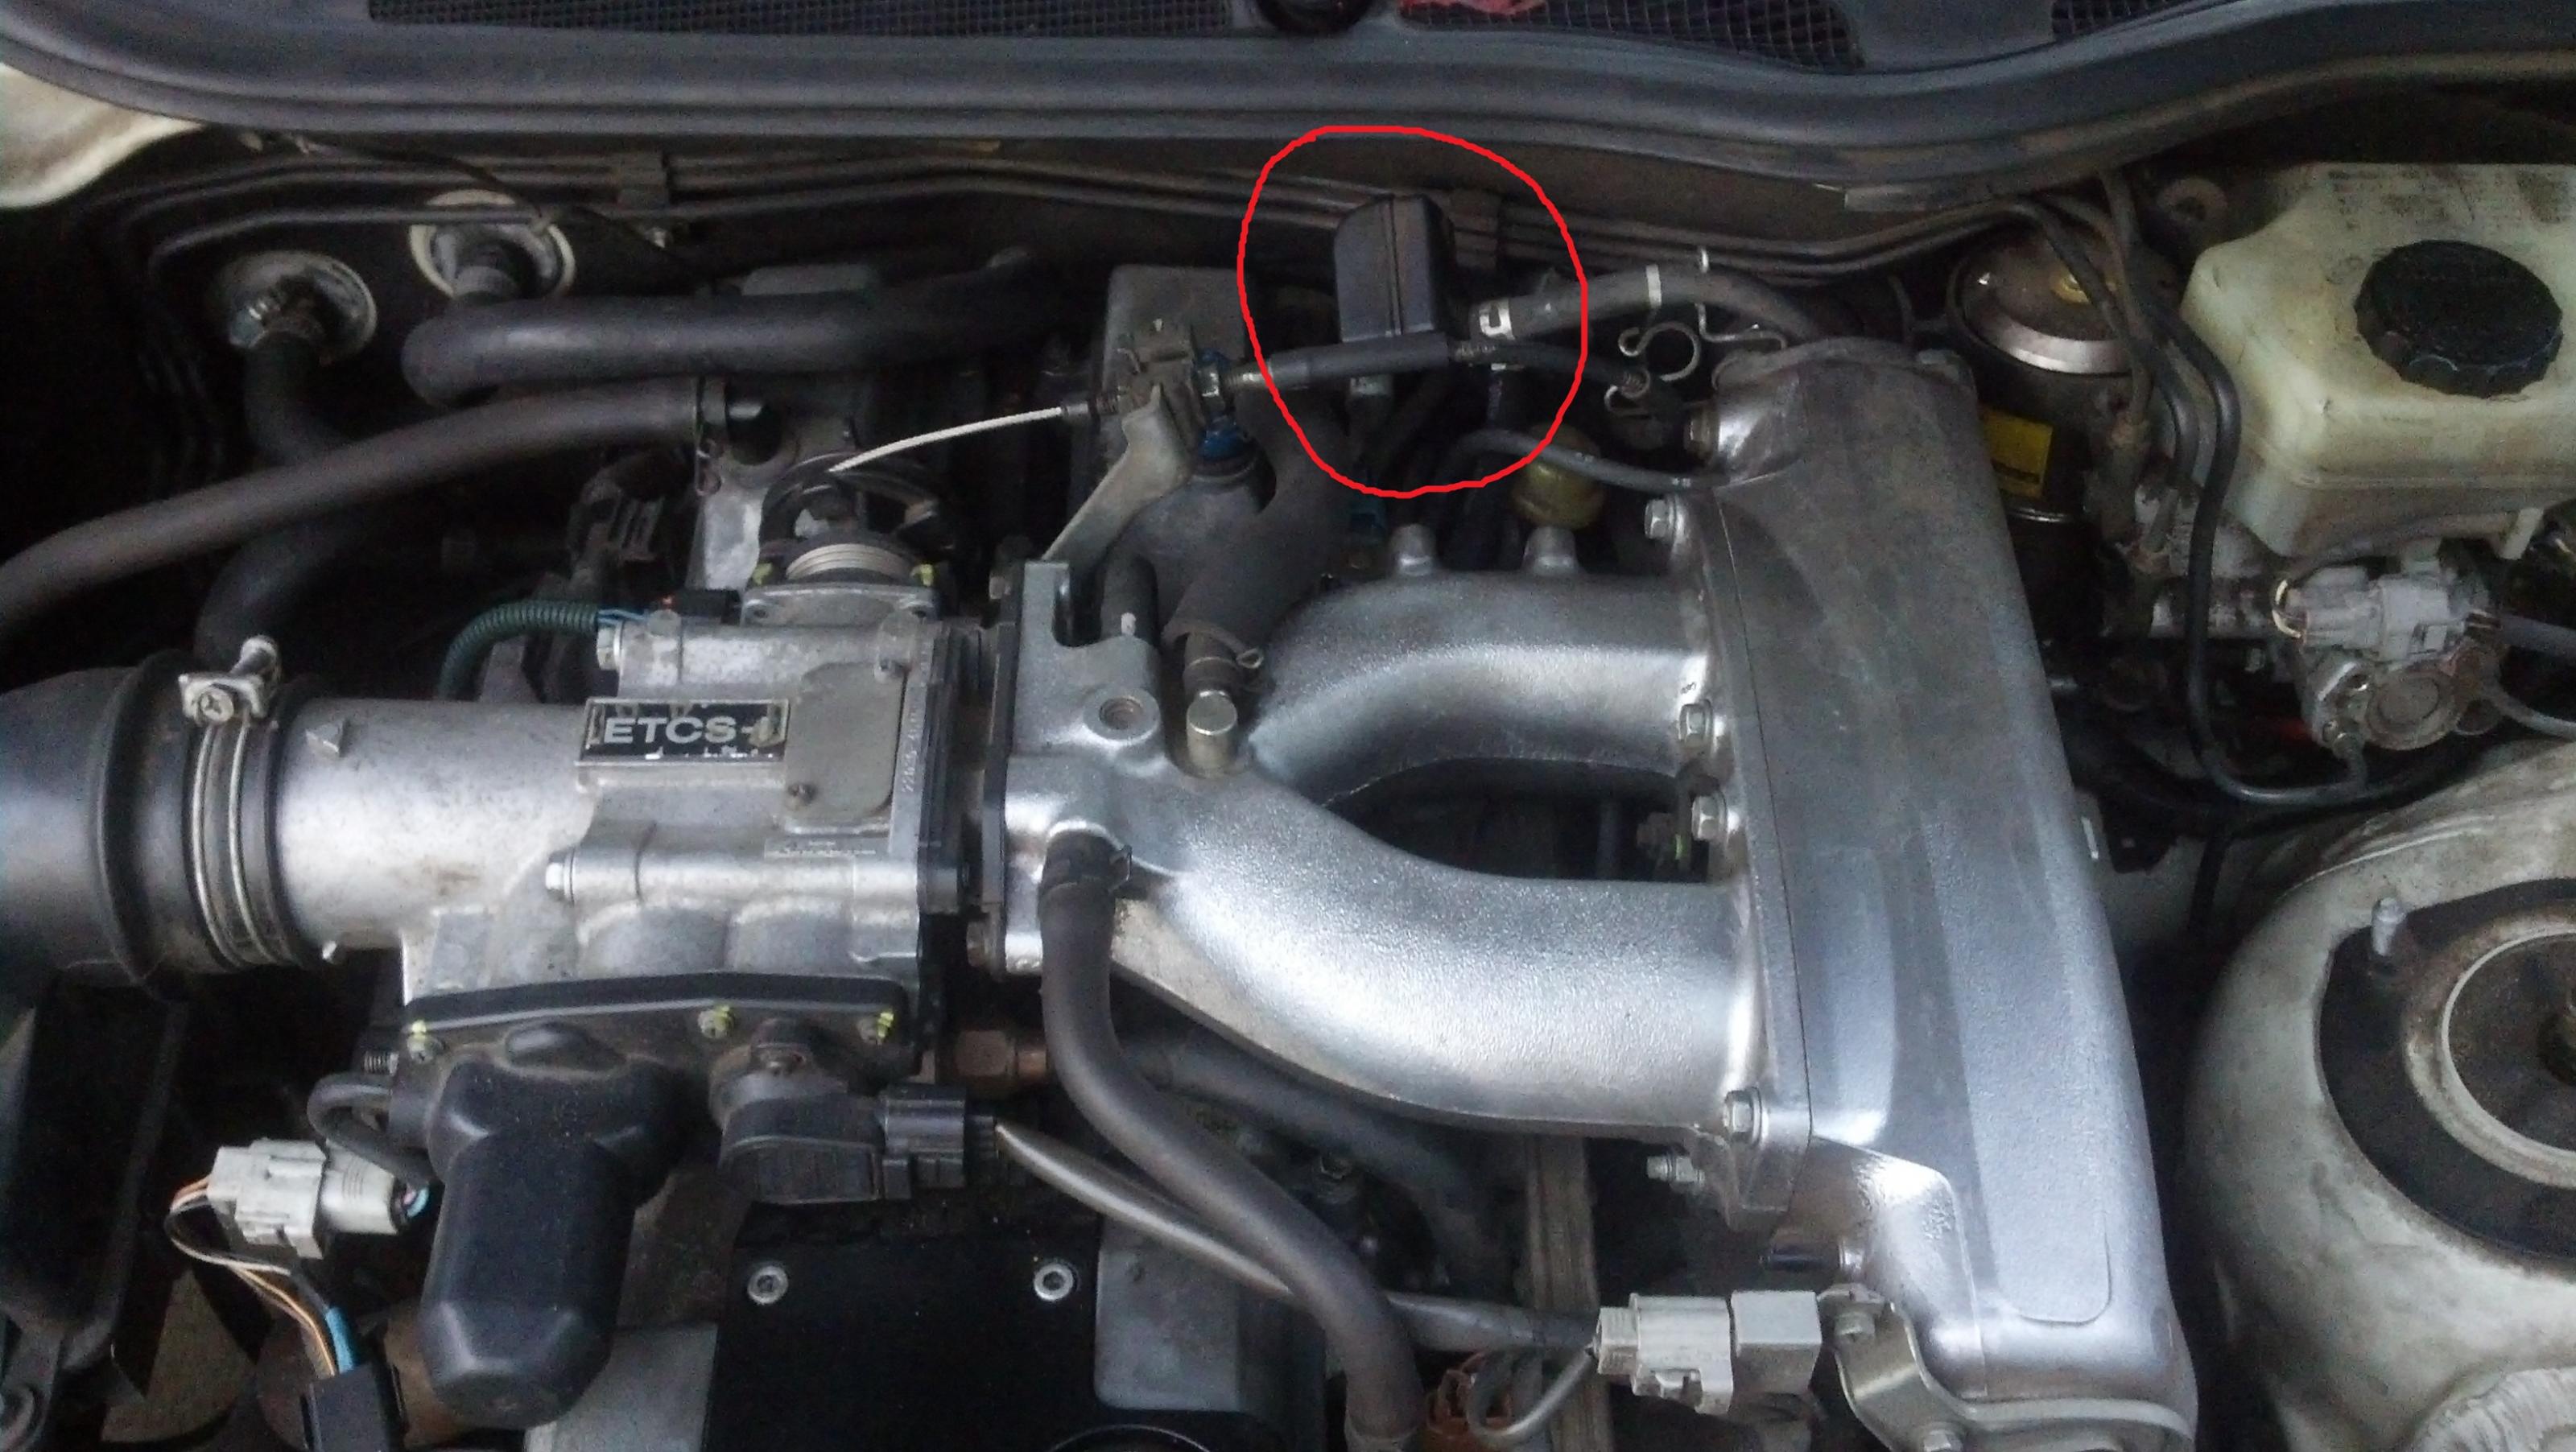 Need Help Identifying This Part on my 1998 GS300